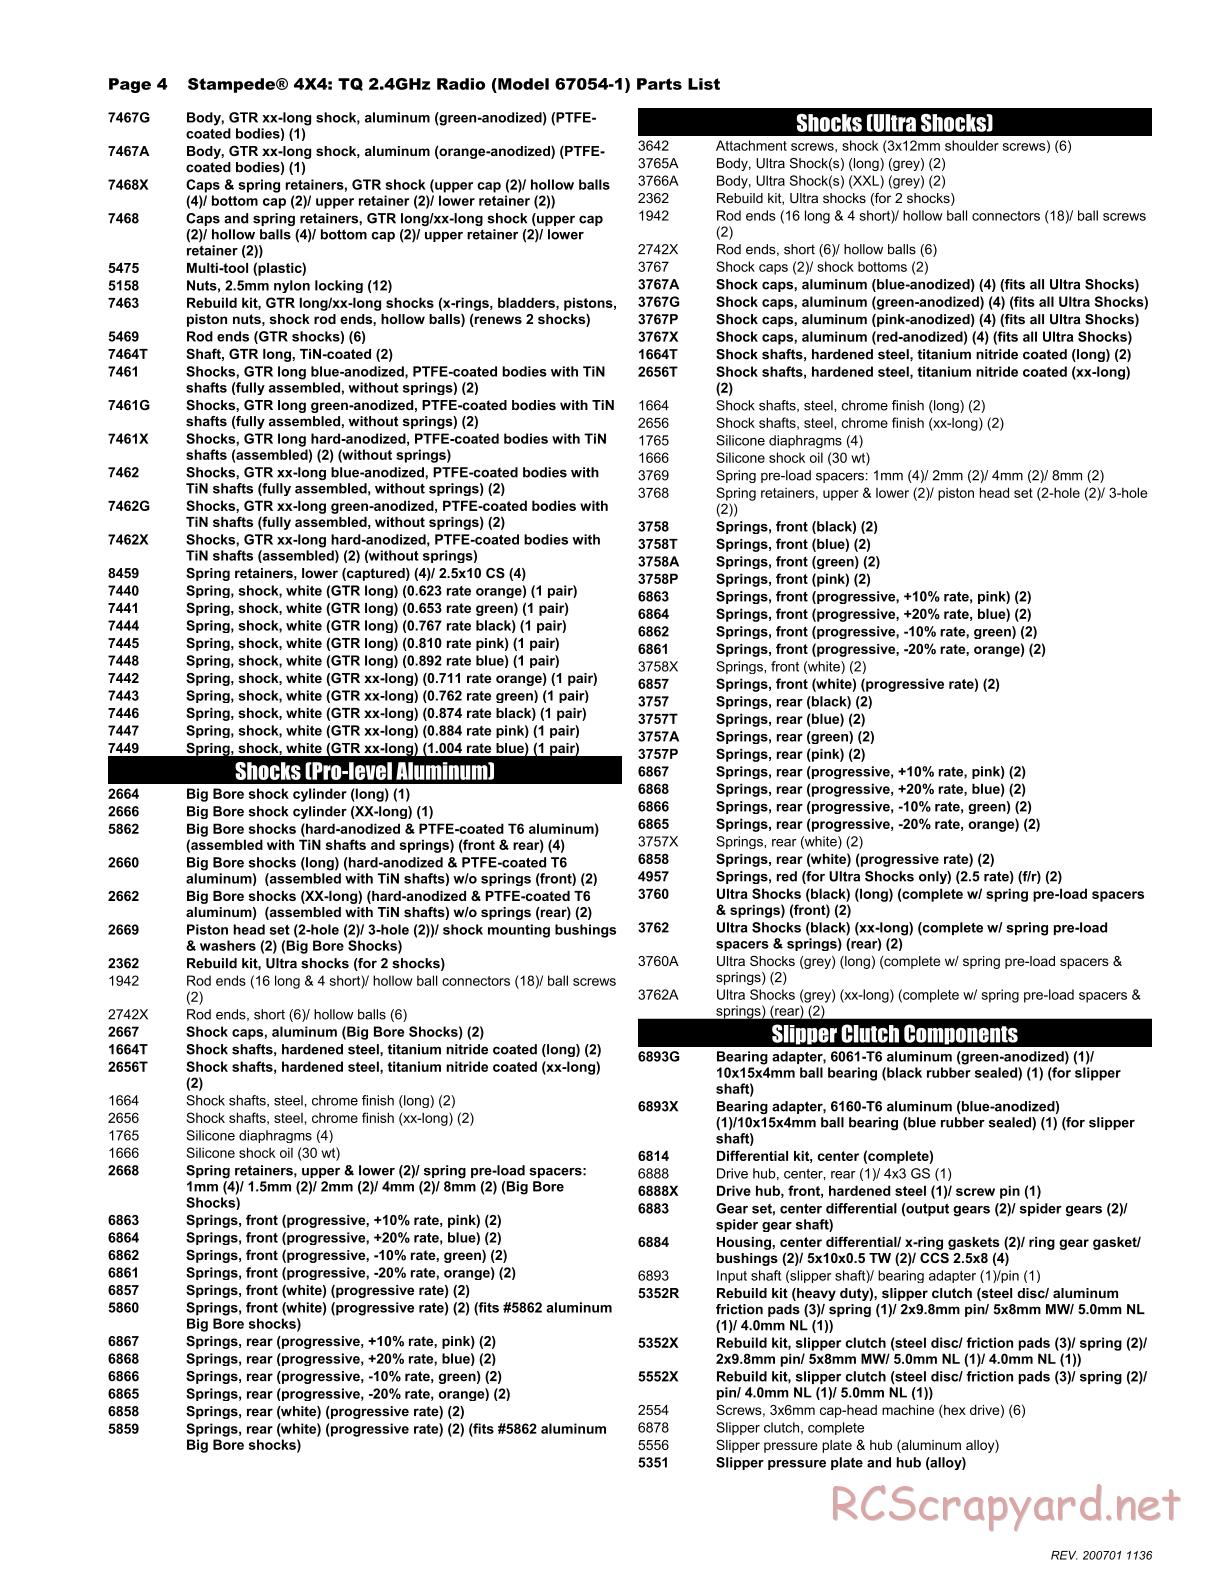 Traxxas - Stampede 4x4 - Parts List - Page 4